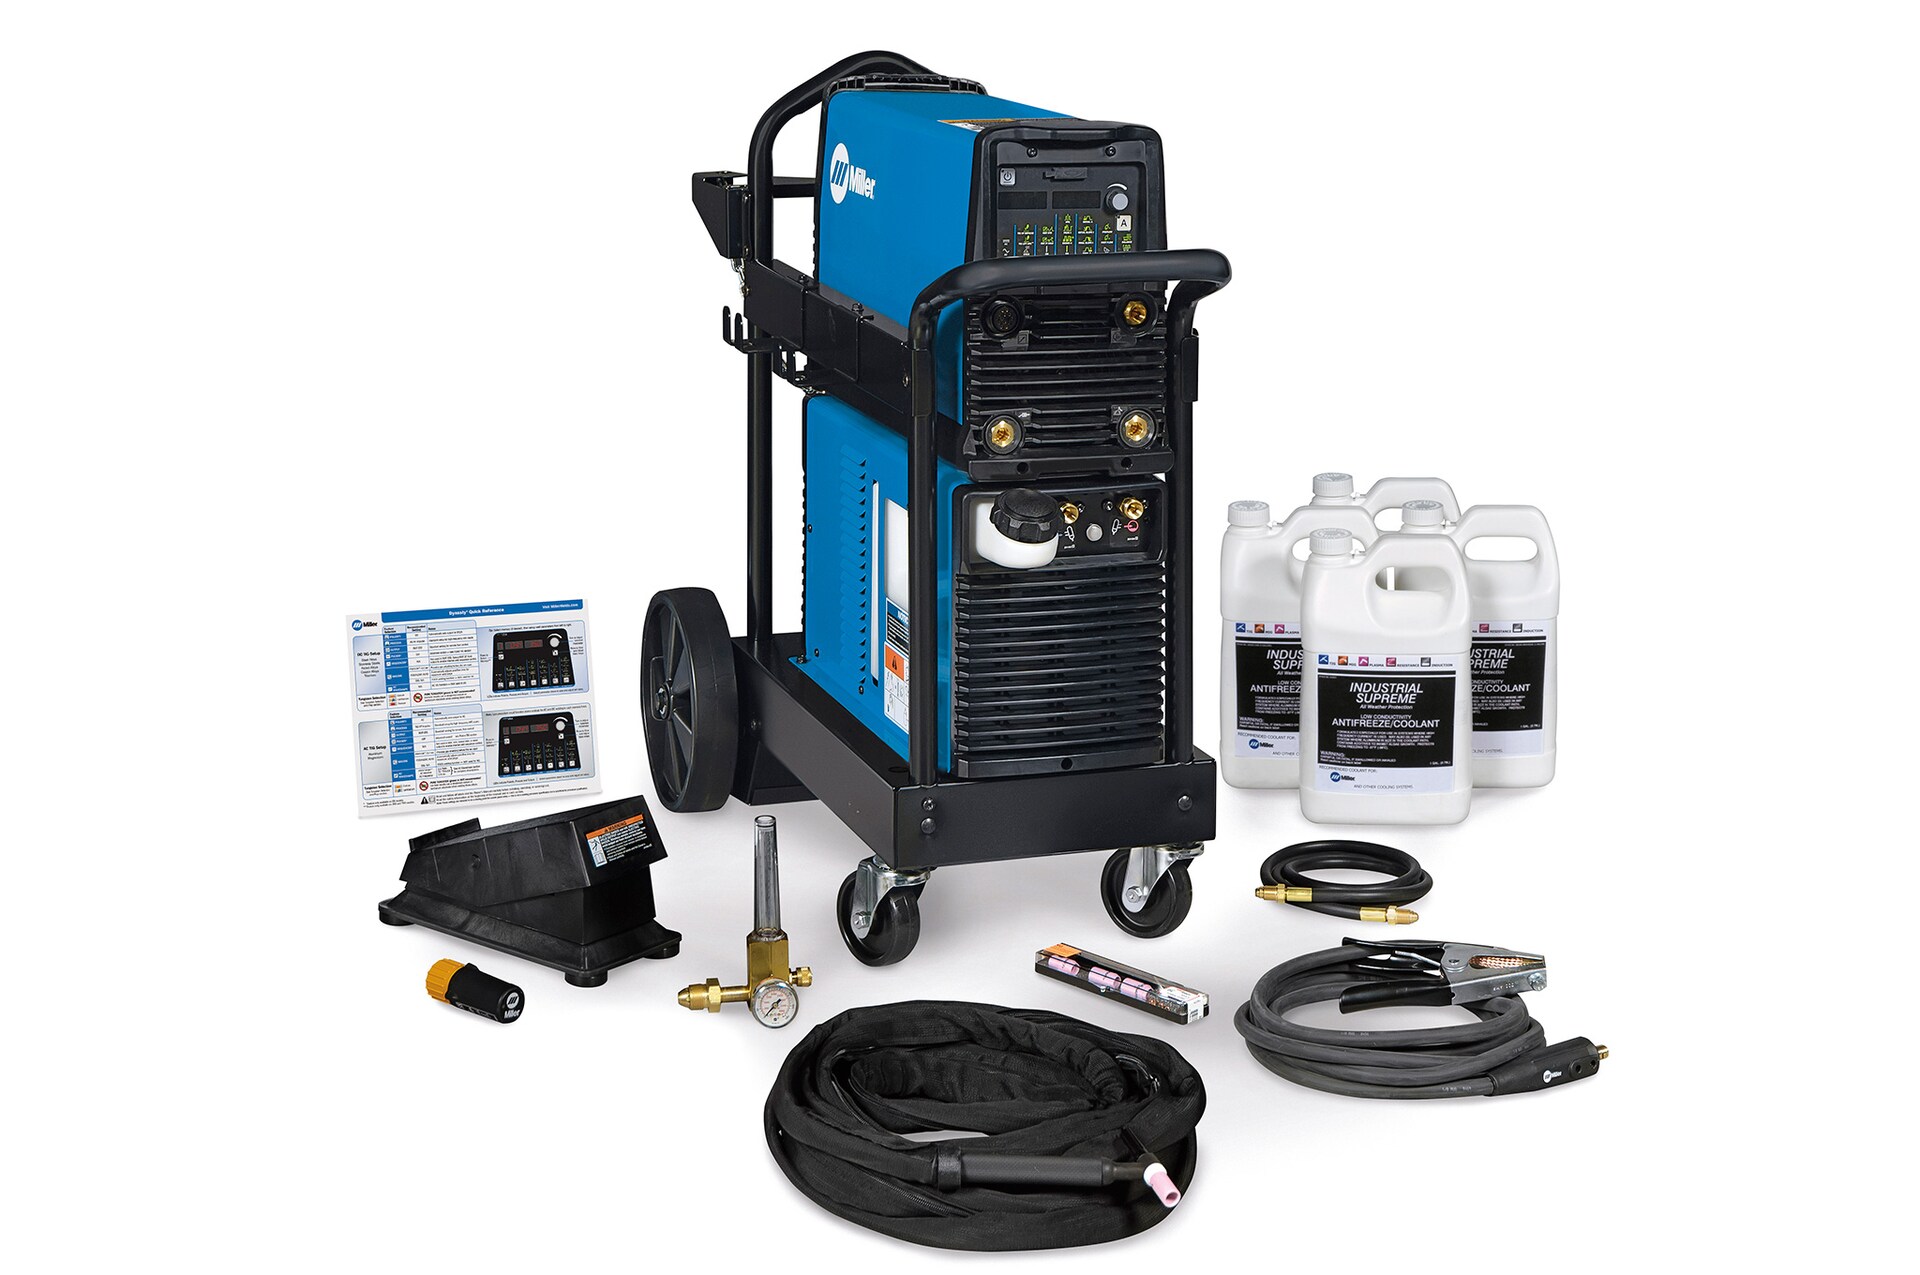 Troubleshooting Miller Syncrowave 210 Problems: 7 Expert Solutions for Welding Challenges